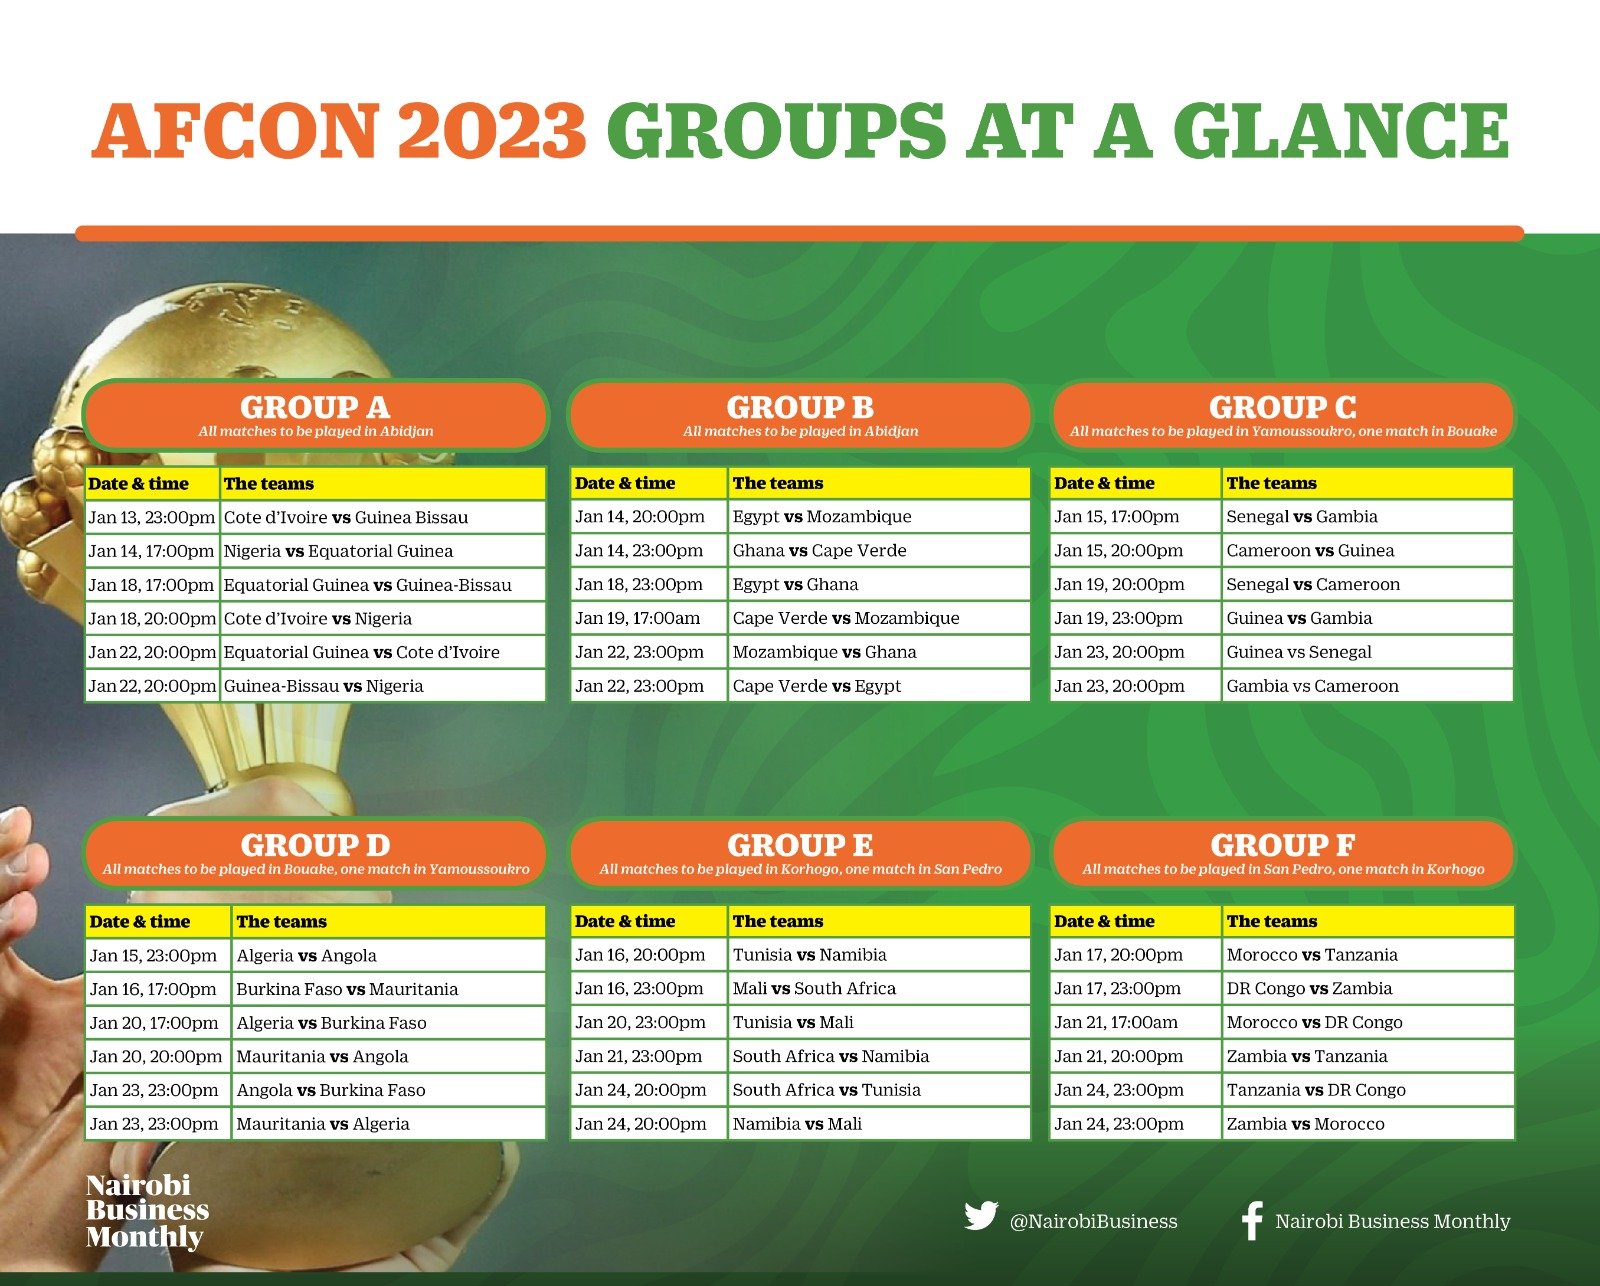 Afcon 2023 groups at a glance - Nairobi Business Monthly